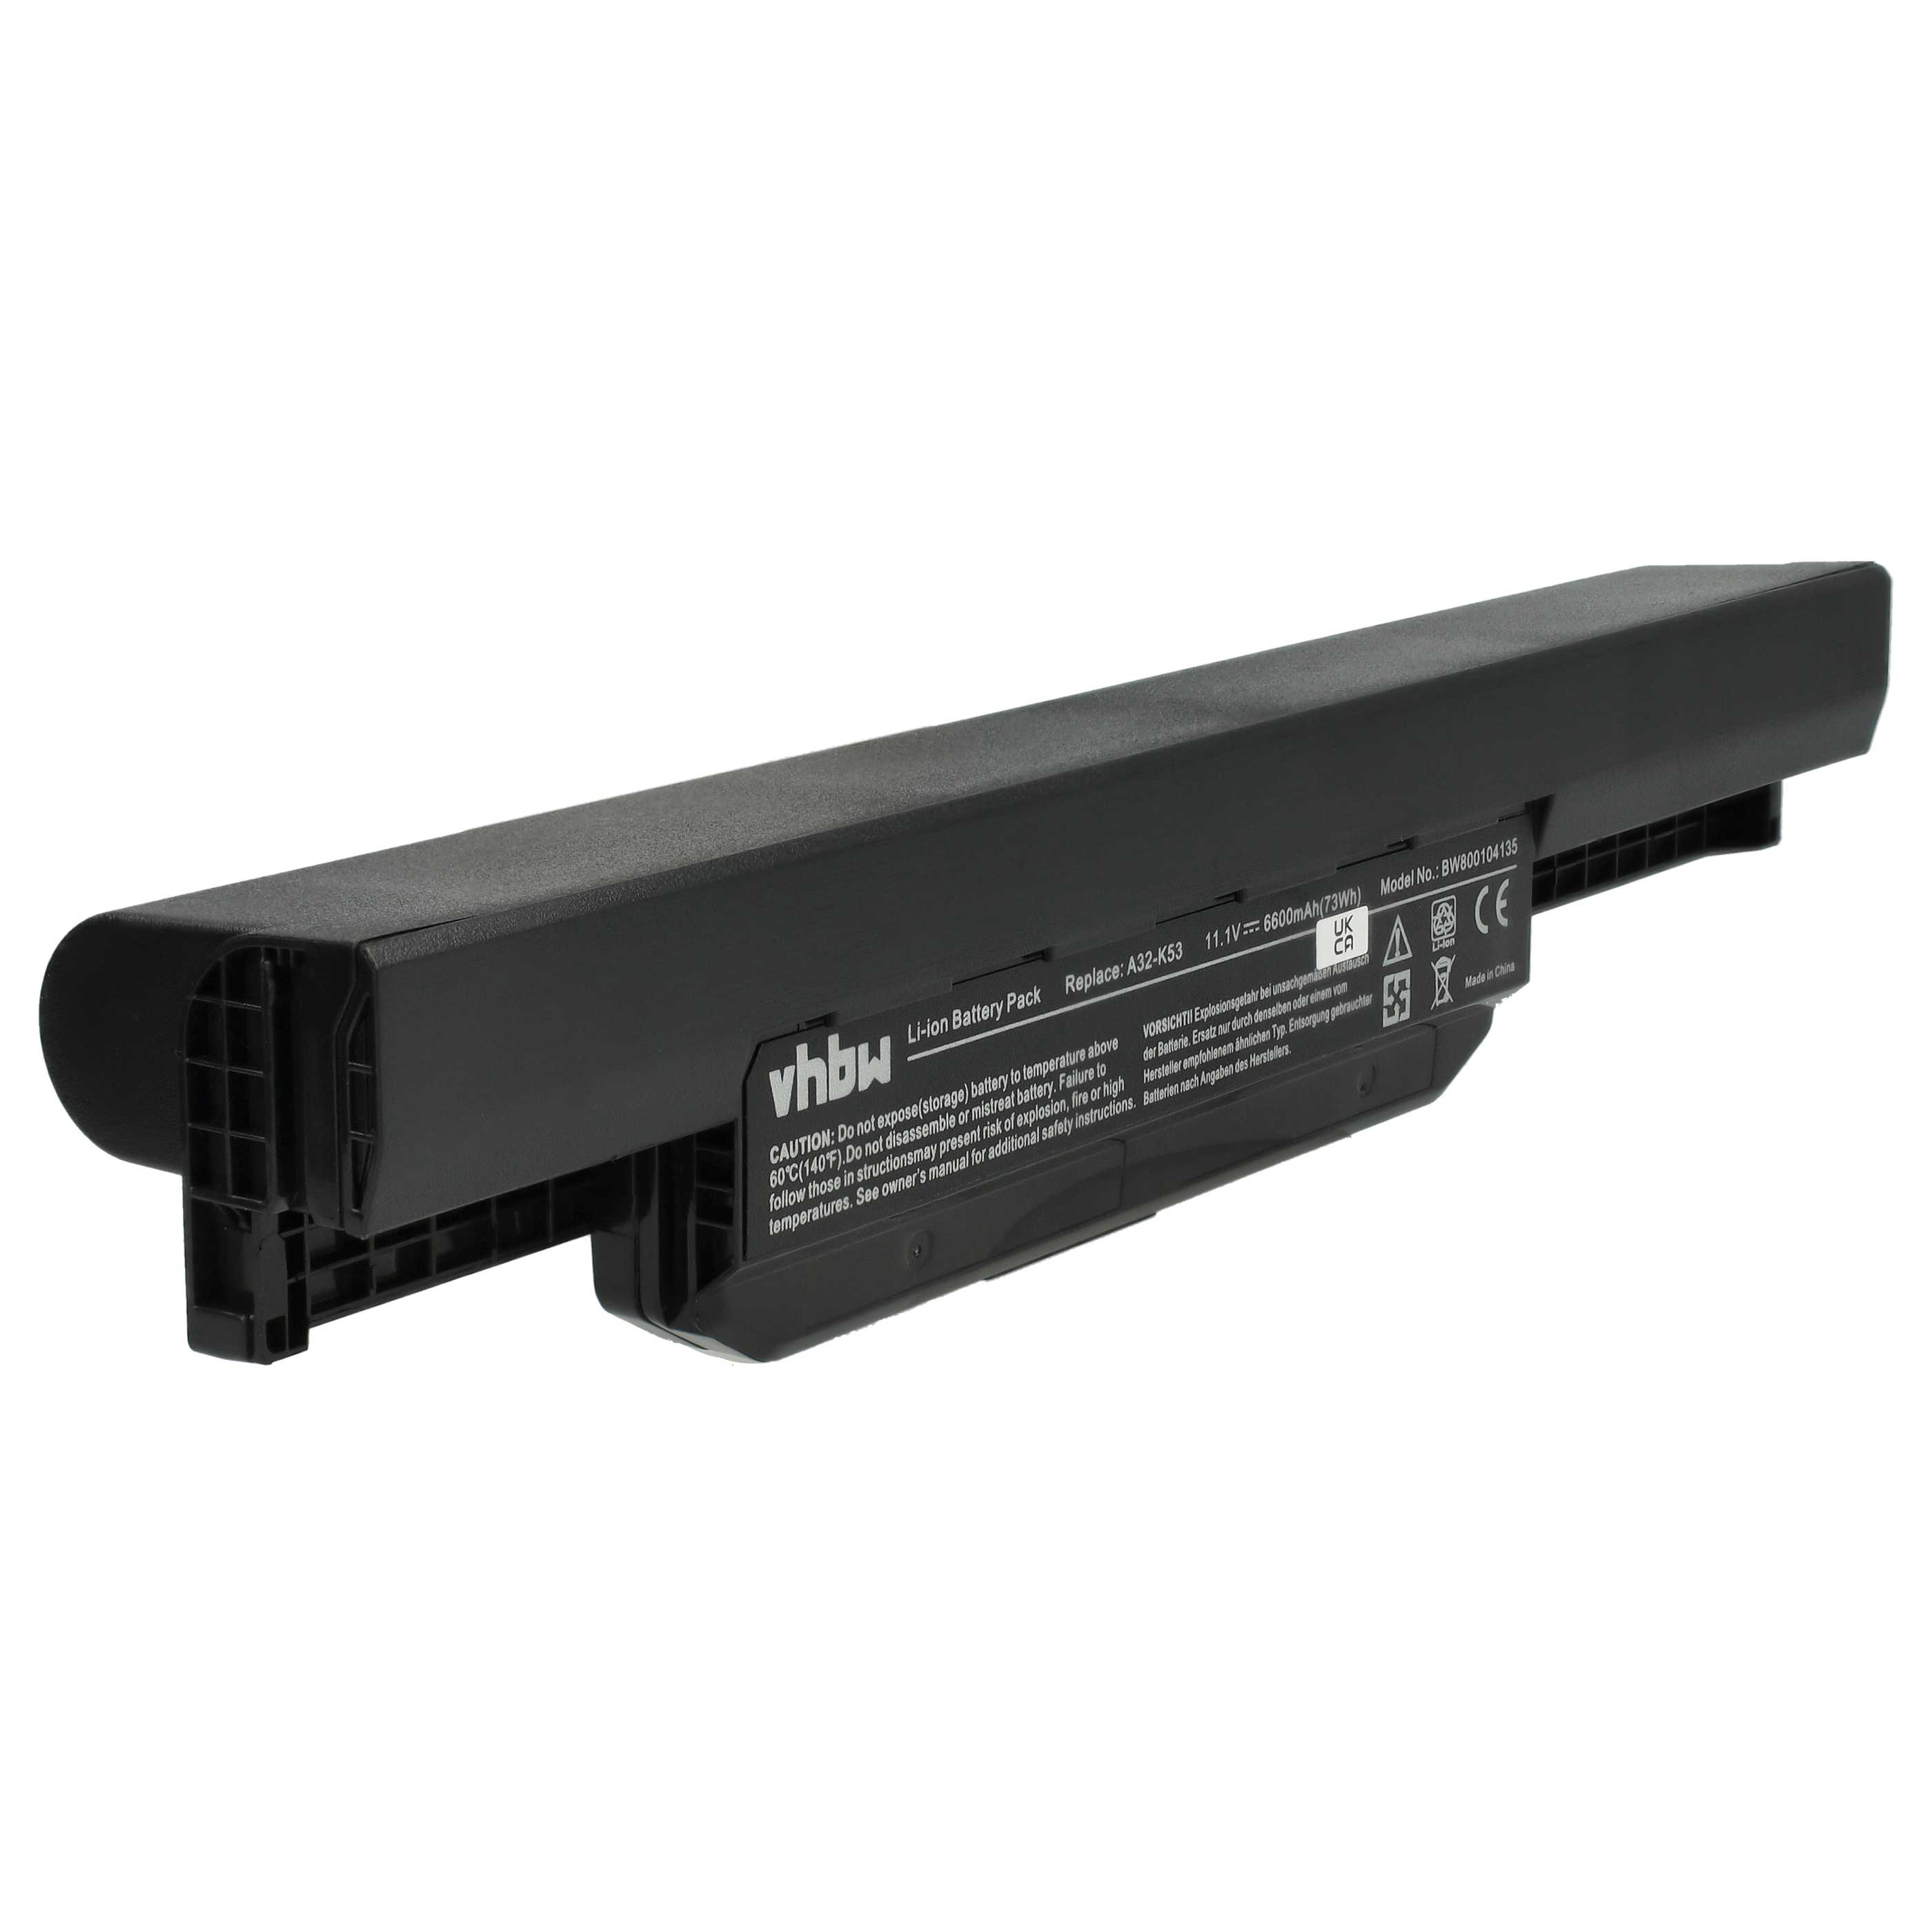 Notebook Battery Replacement for Asus A31-K53, 07G016H31875M, 0B20-00X50AS - 6600mAh 11.1V Li-Ion, black